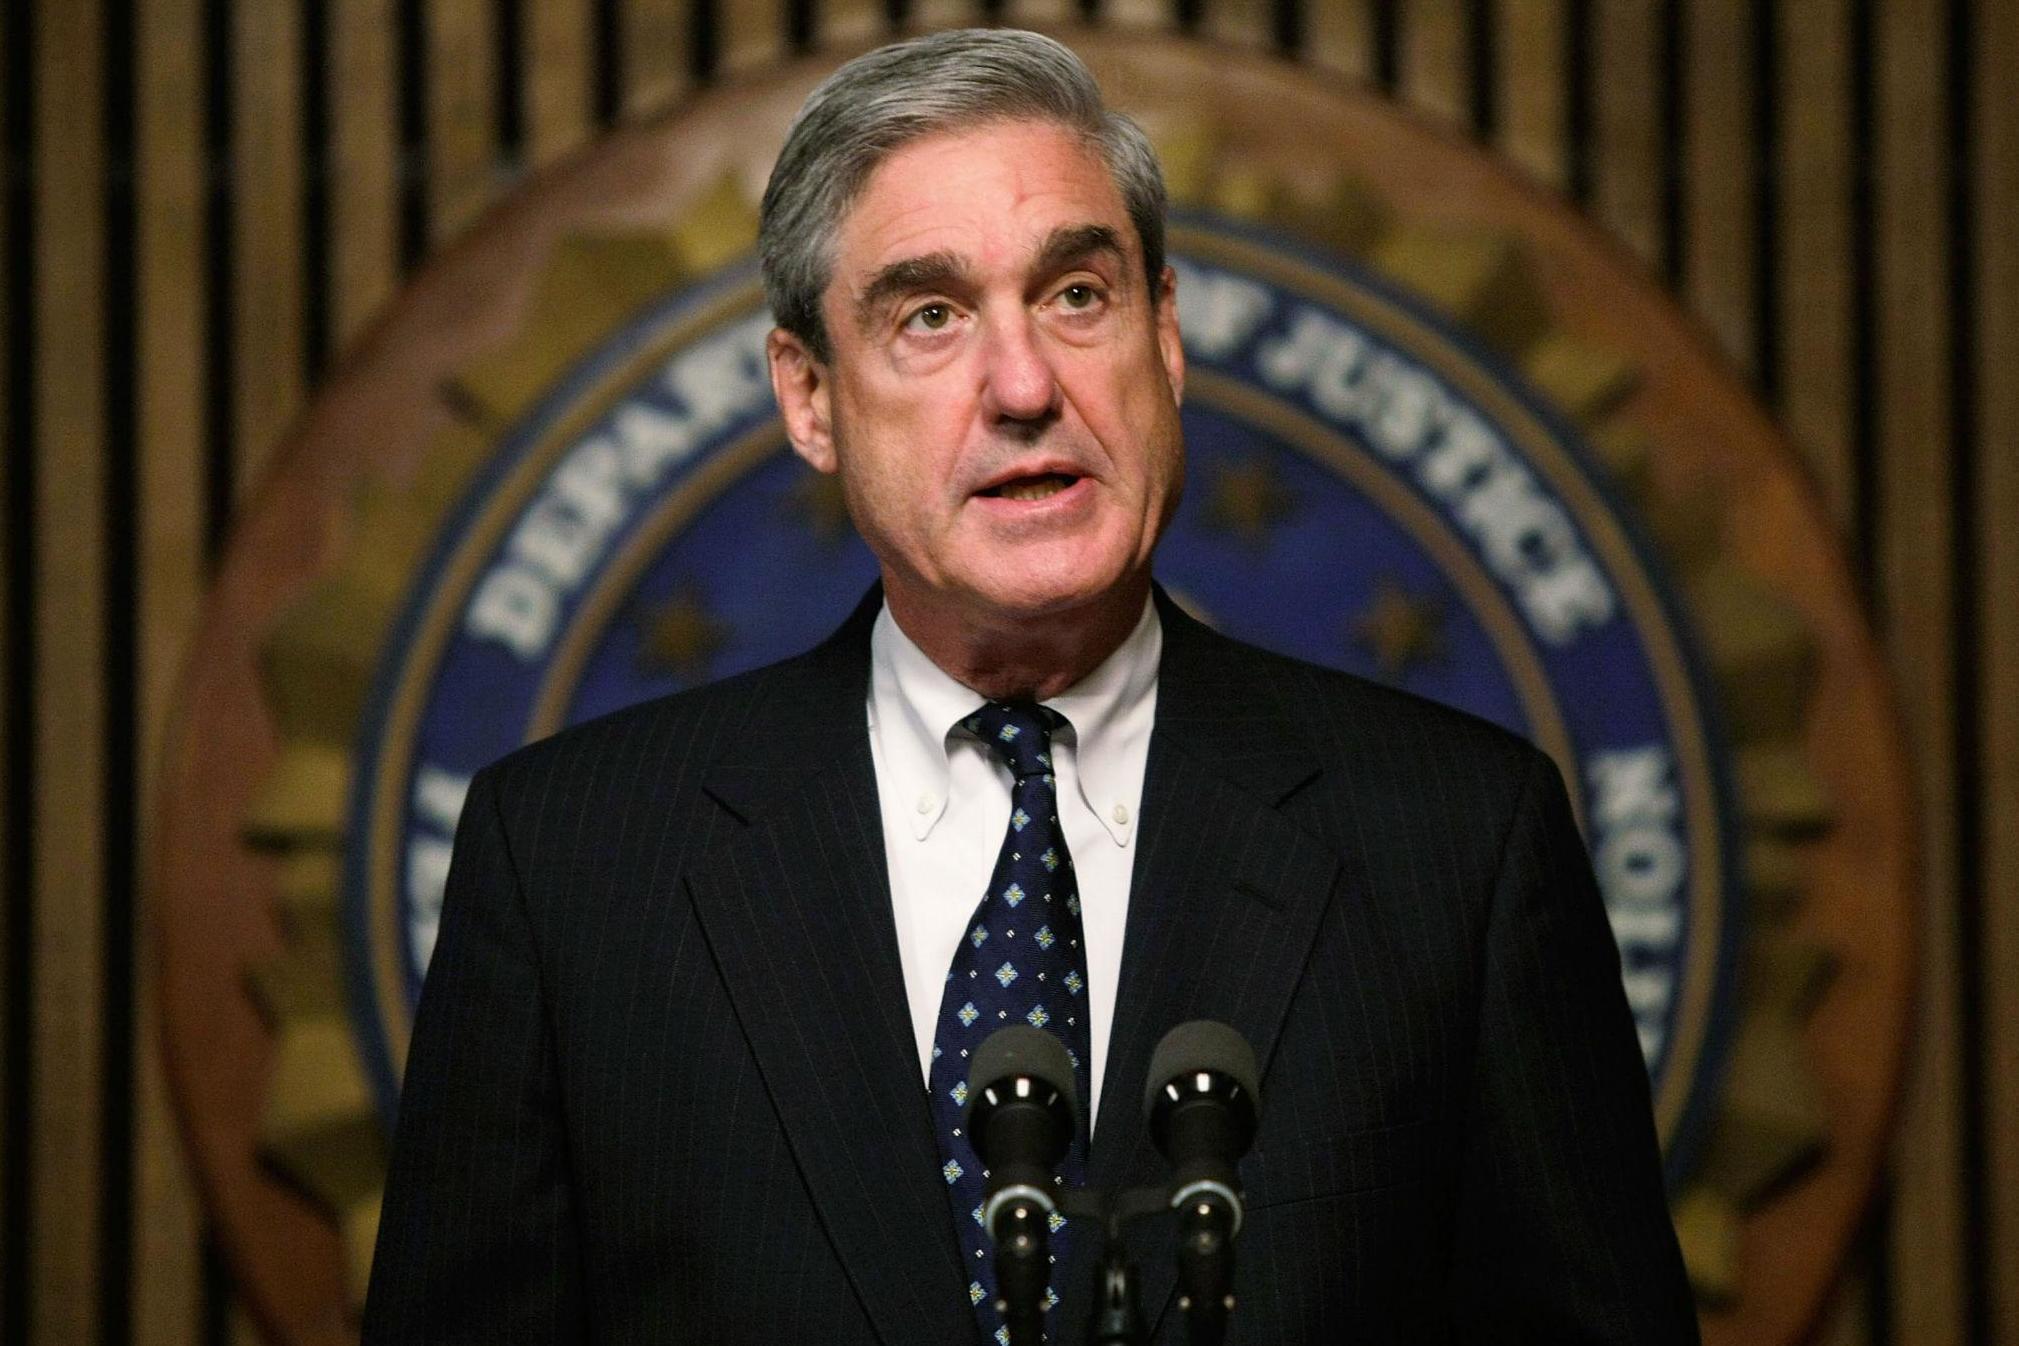 Special Counsel Robert Mueller is leading the federal probe into Russian meddling in the 2016 election